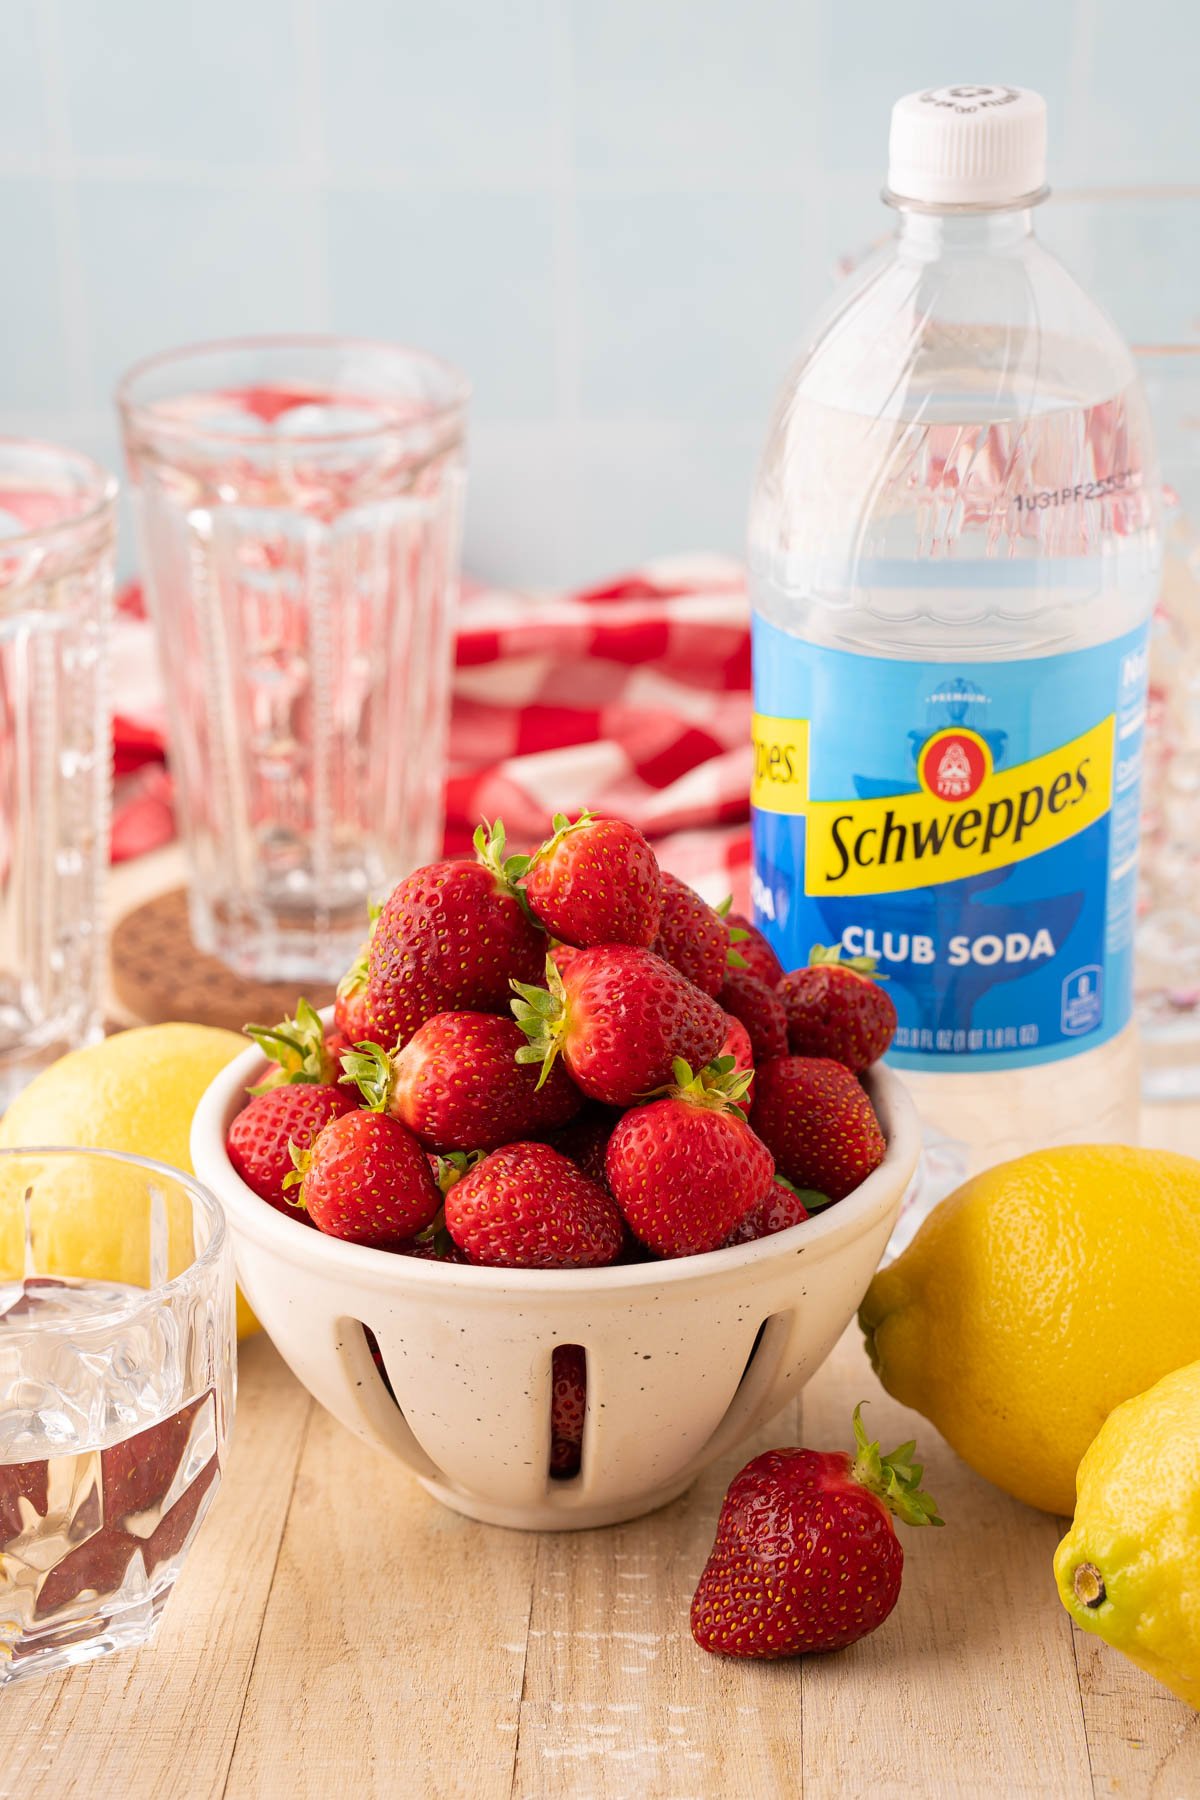 Ingredients to make strawberry lemonade on a wooden table.